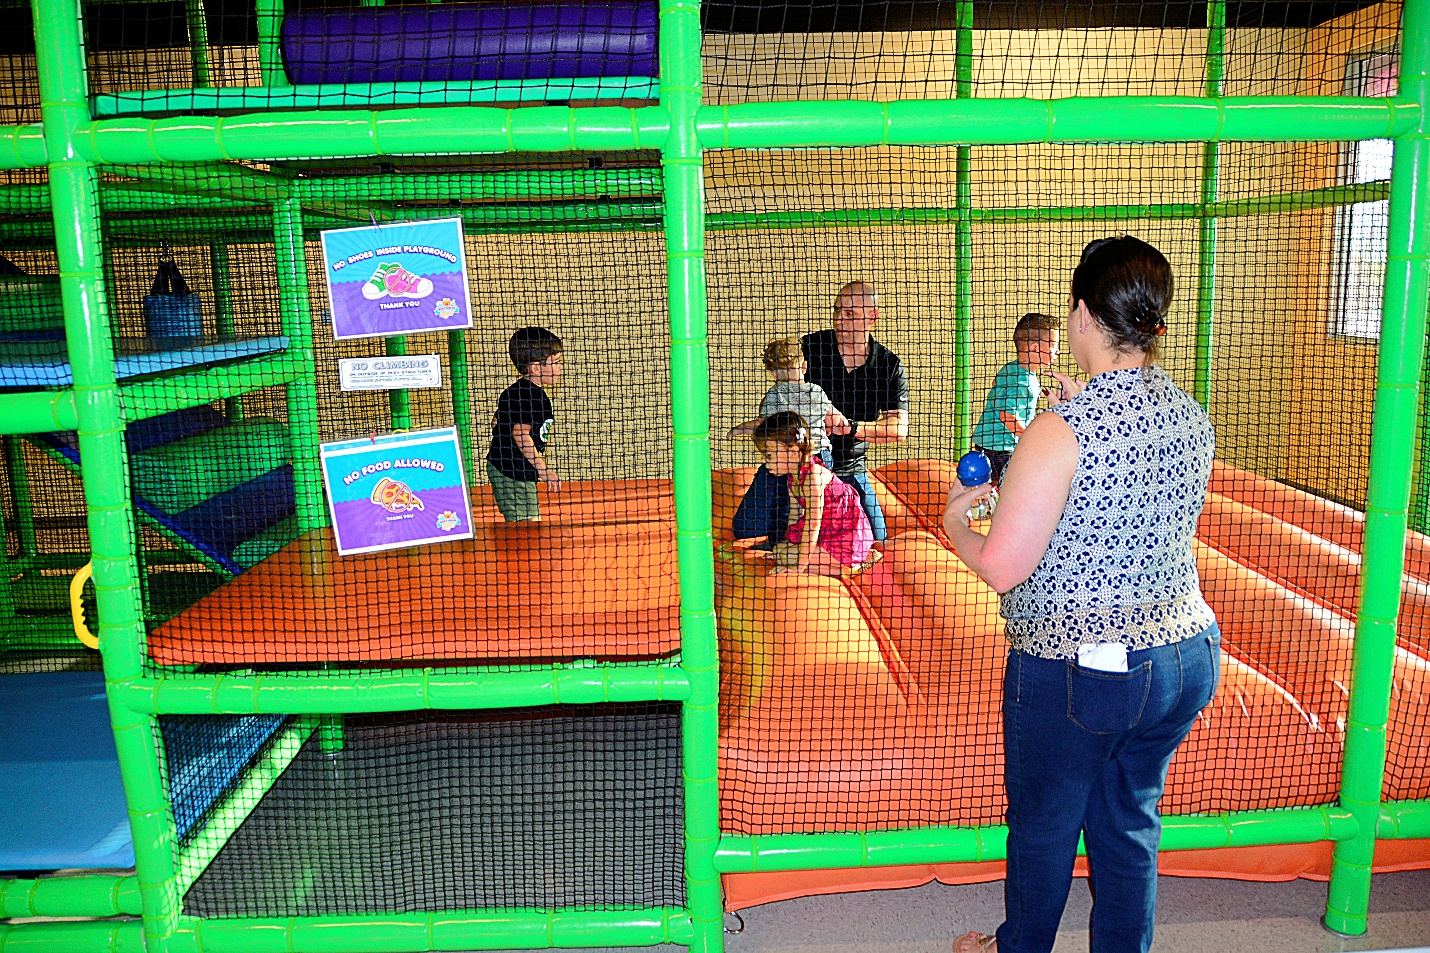 children having fun and enjoying sporty birthday party activities in an indoor playground